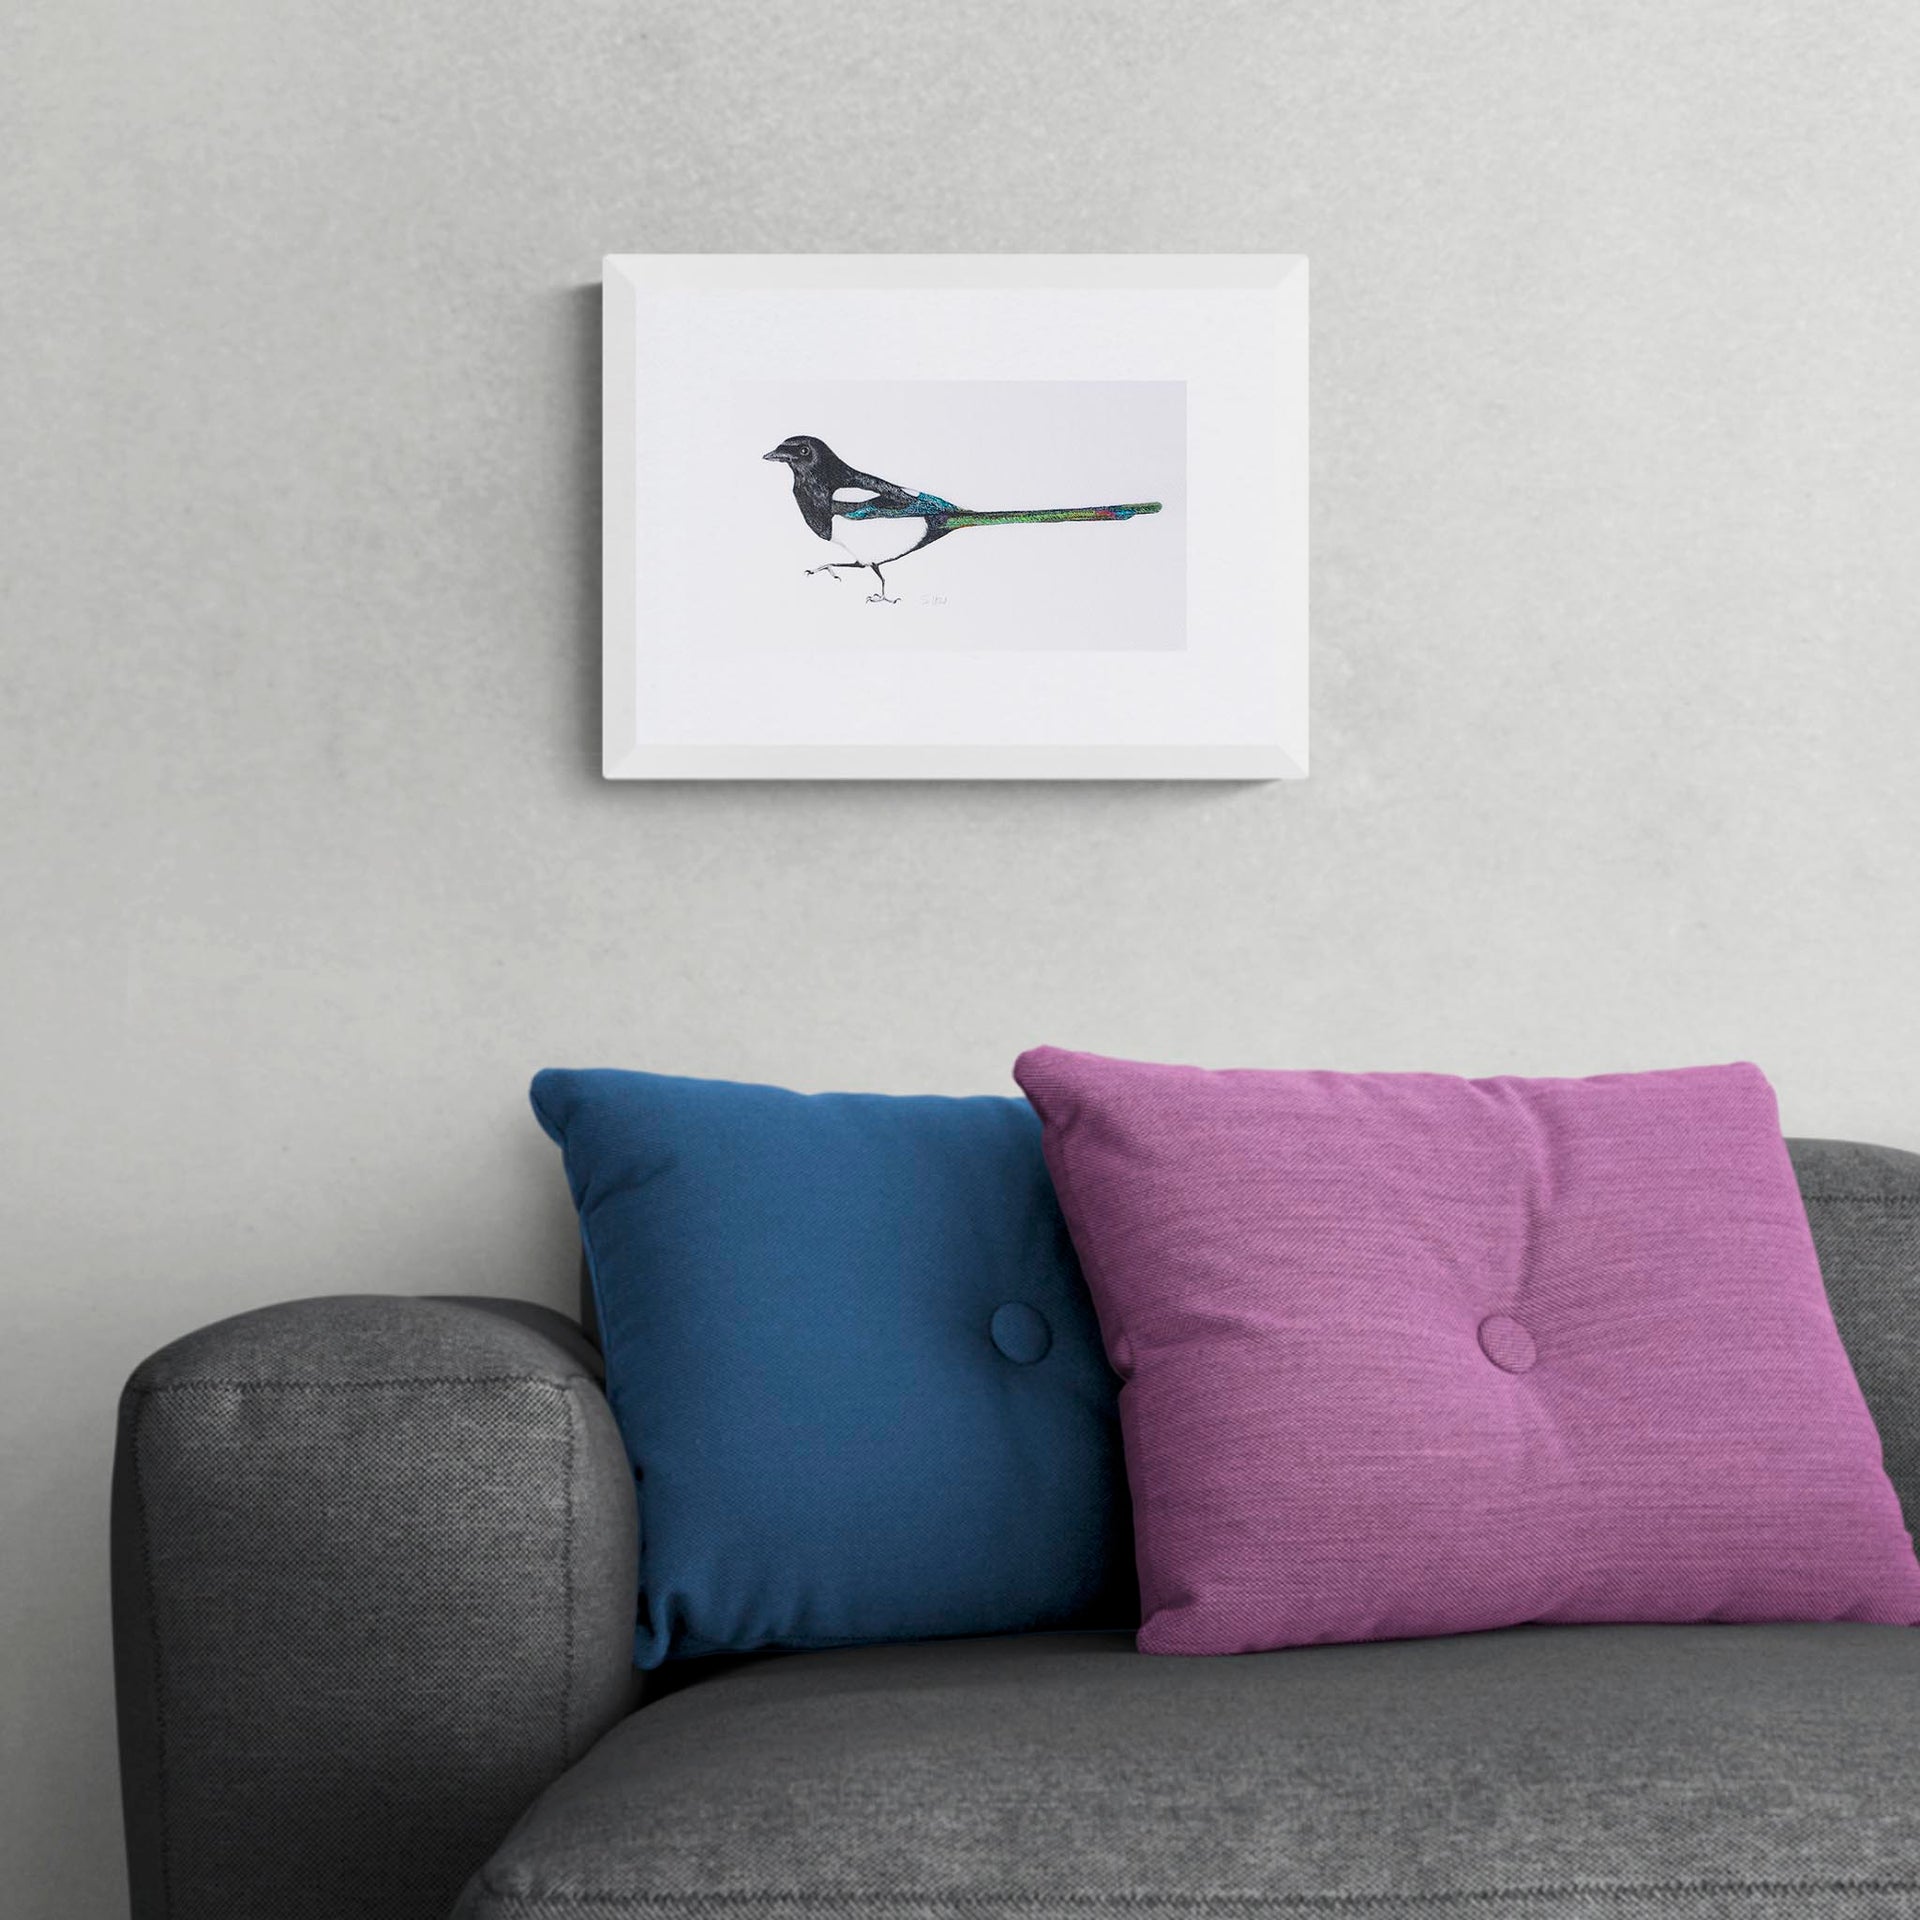 Hand embroidered magpie limited edition print in white frame on the wall